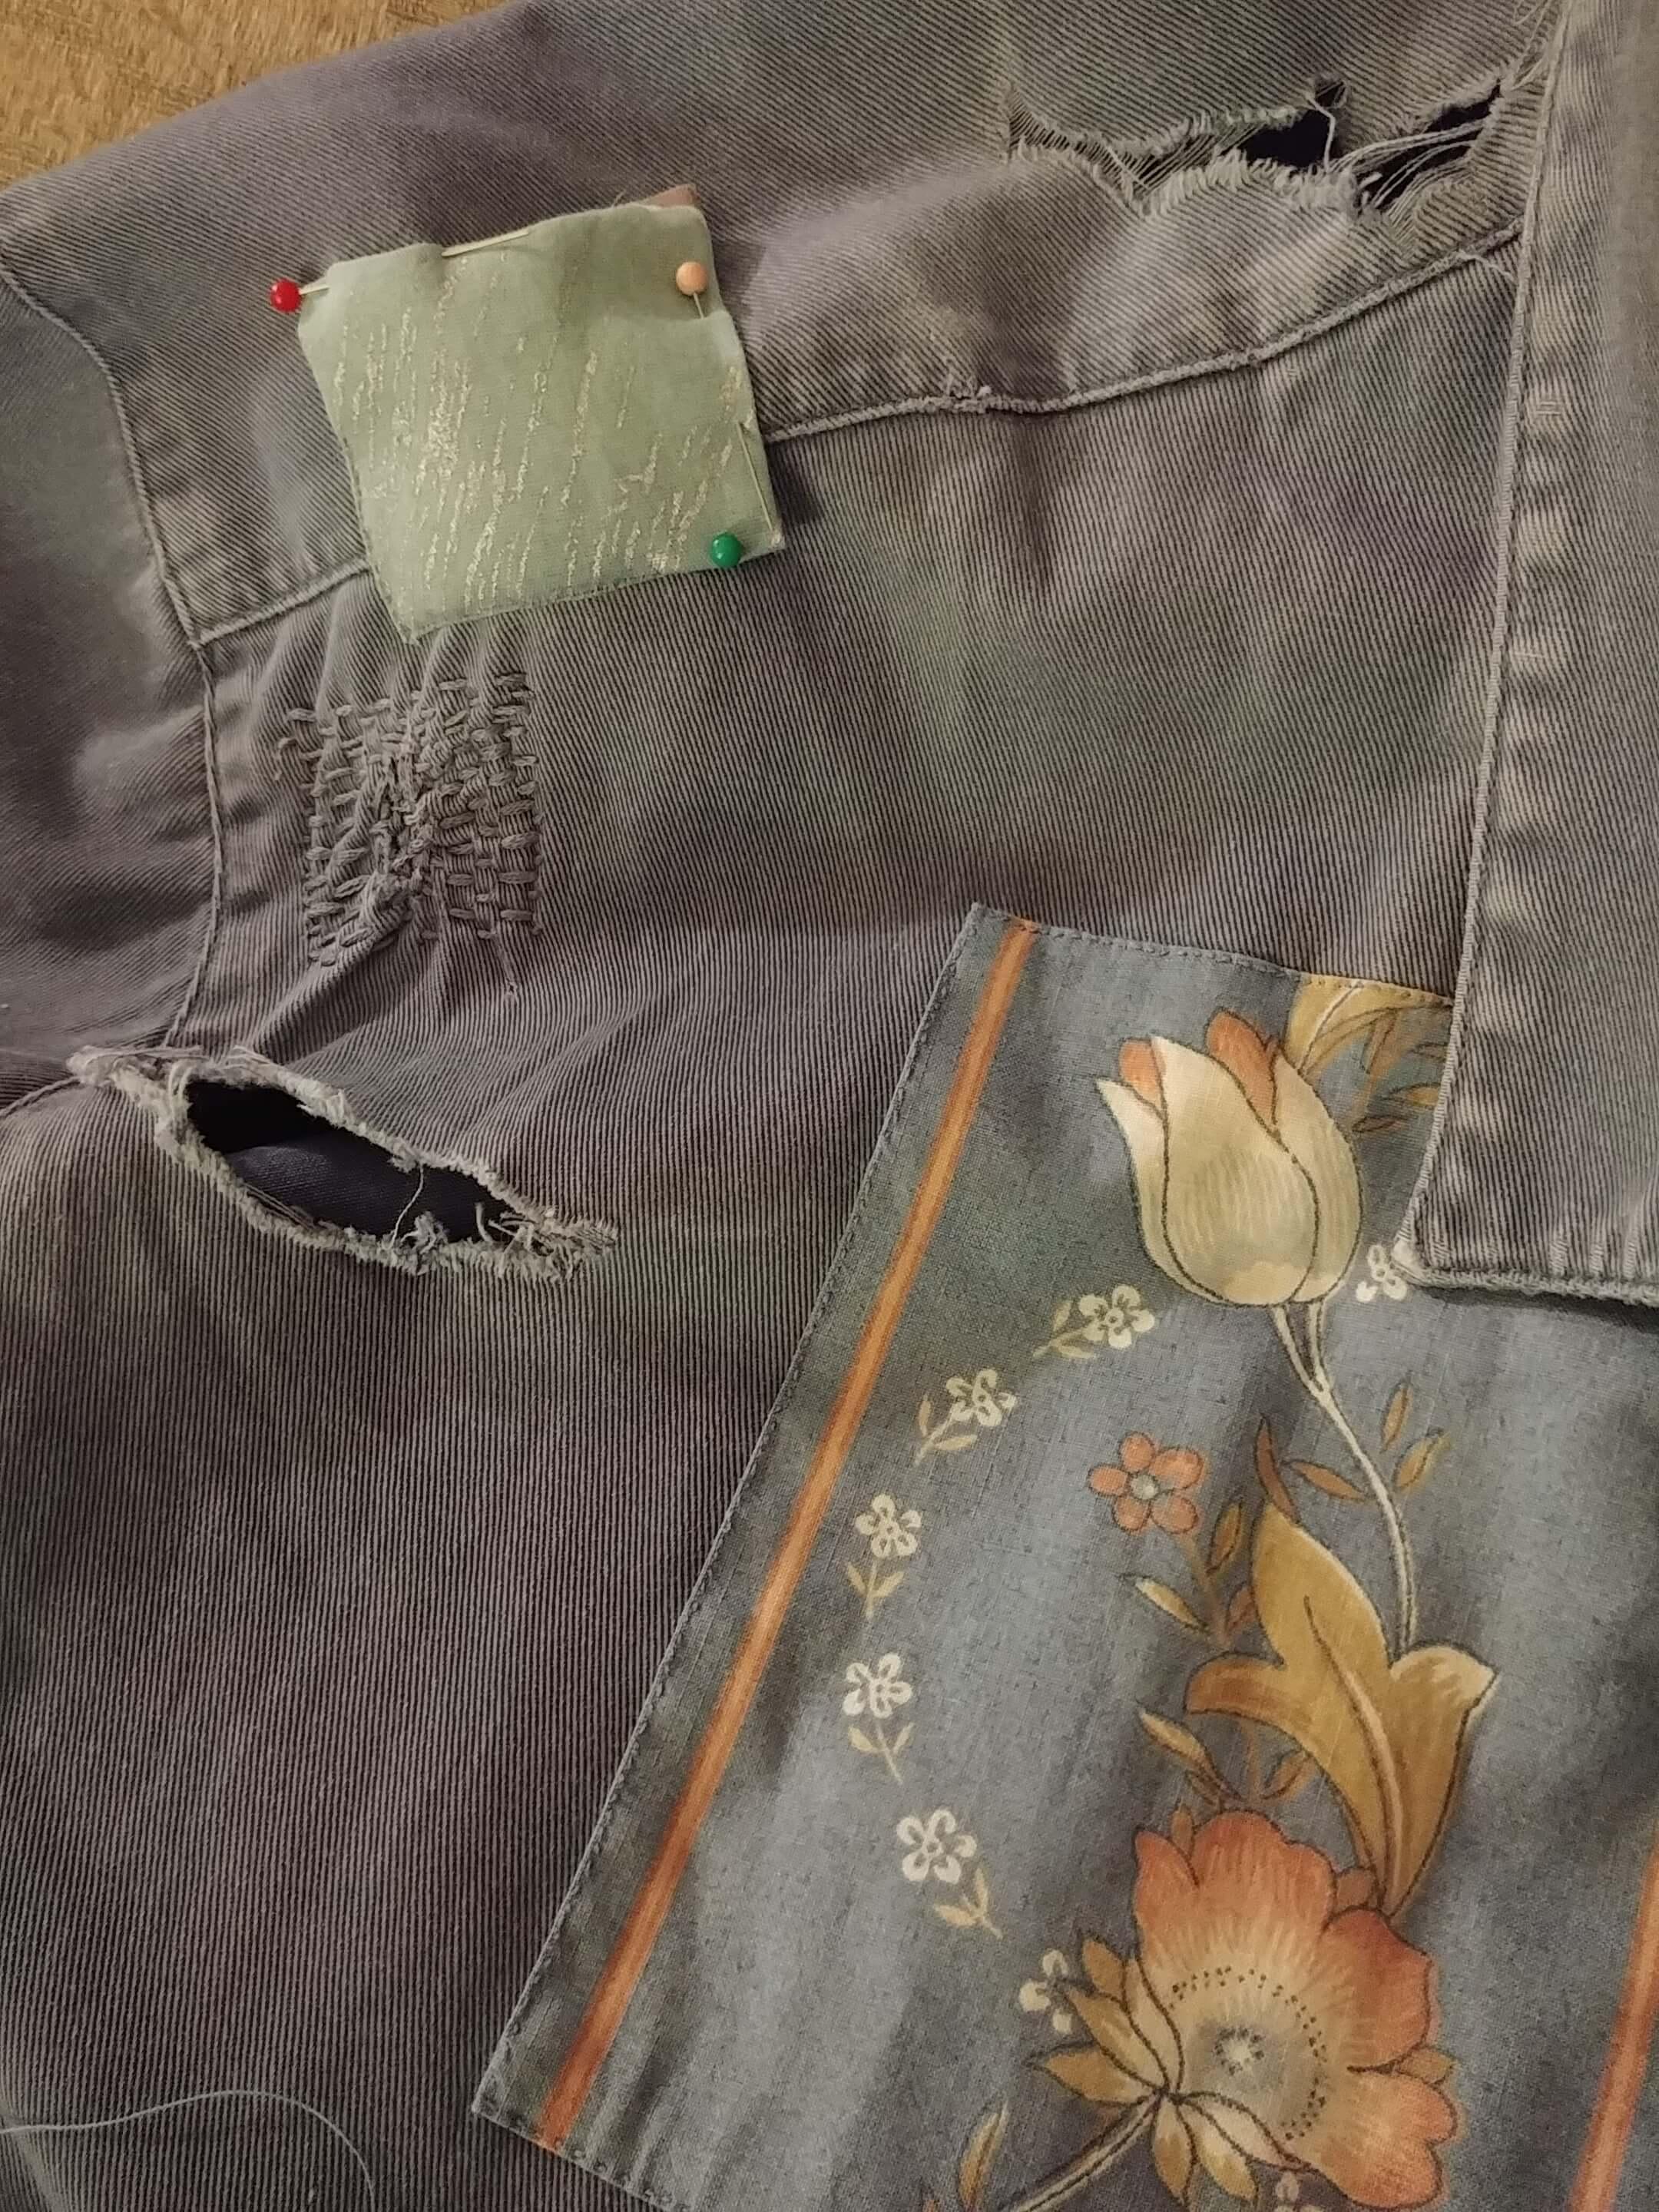 Closeup of a blue jacket with several large rips, a large floral patch, some darning, and a smaller blue and silver patch that's pinned to the jacket and partially sewn down